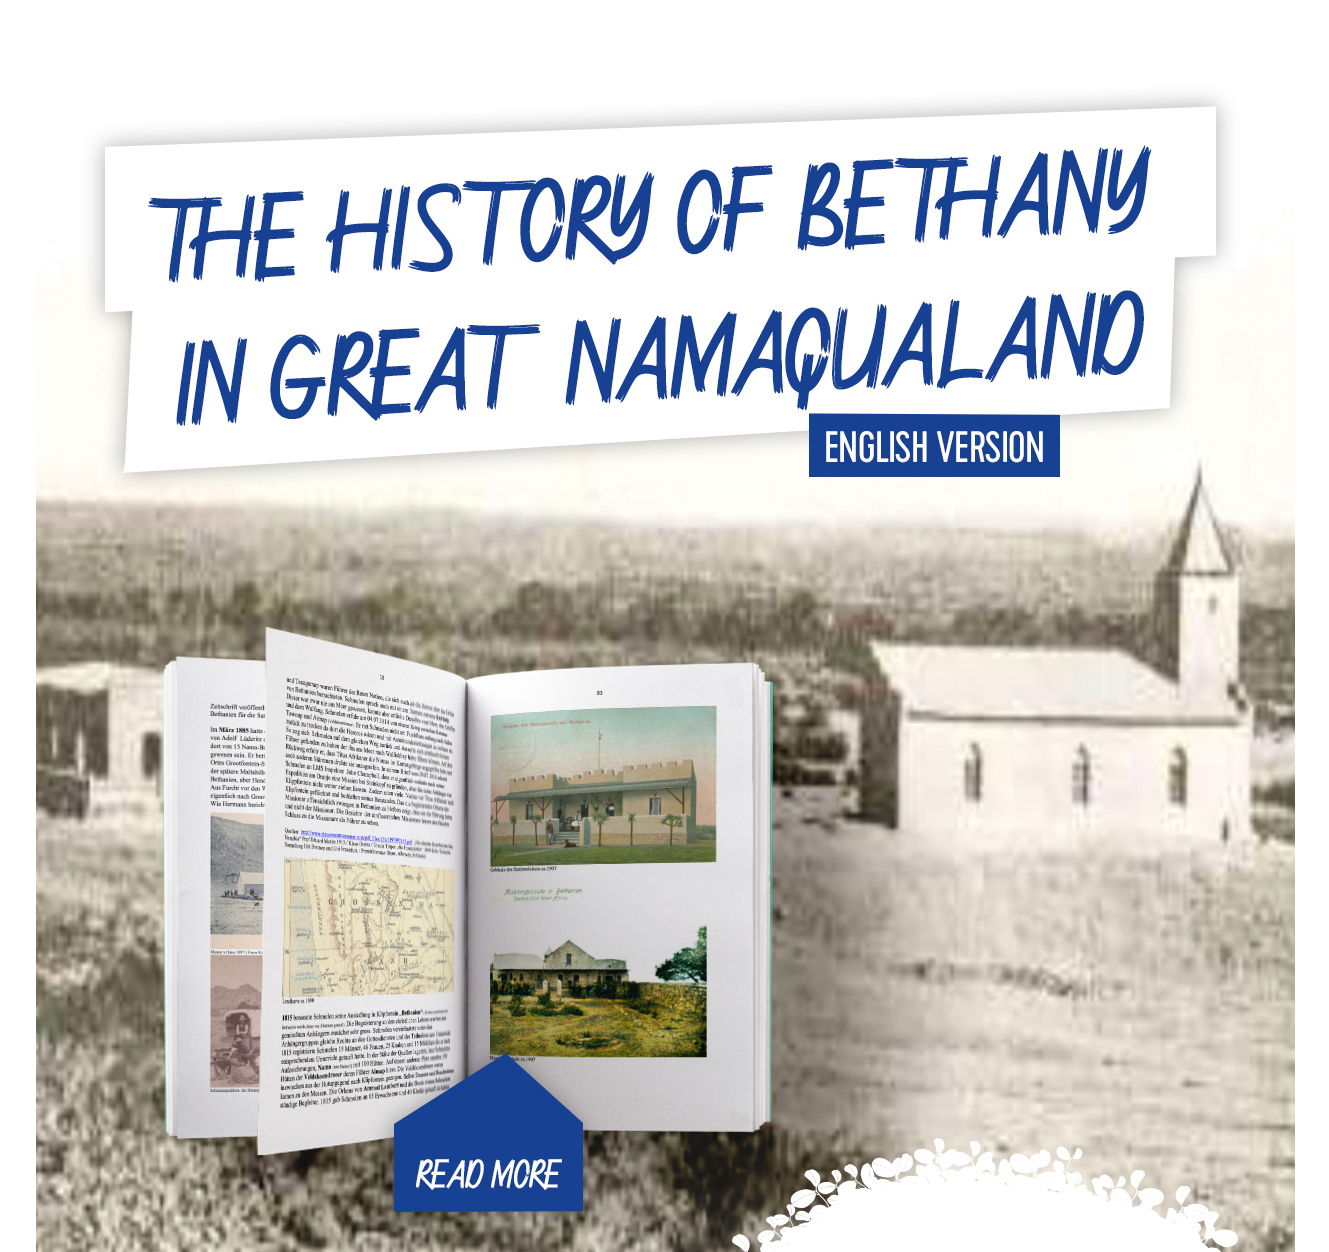 The History of Bethany in Great Namaqualand